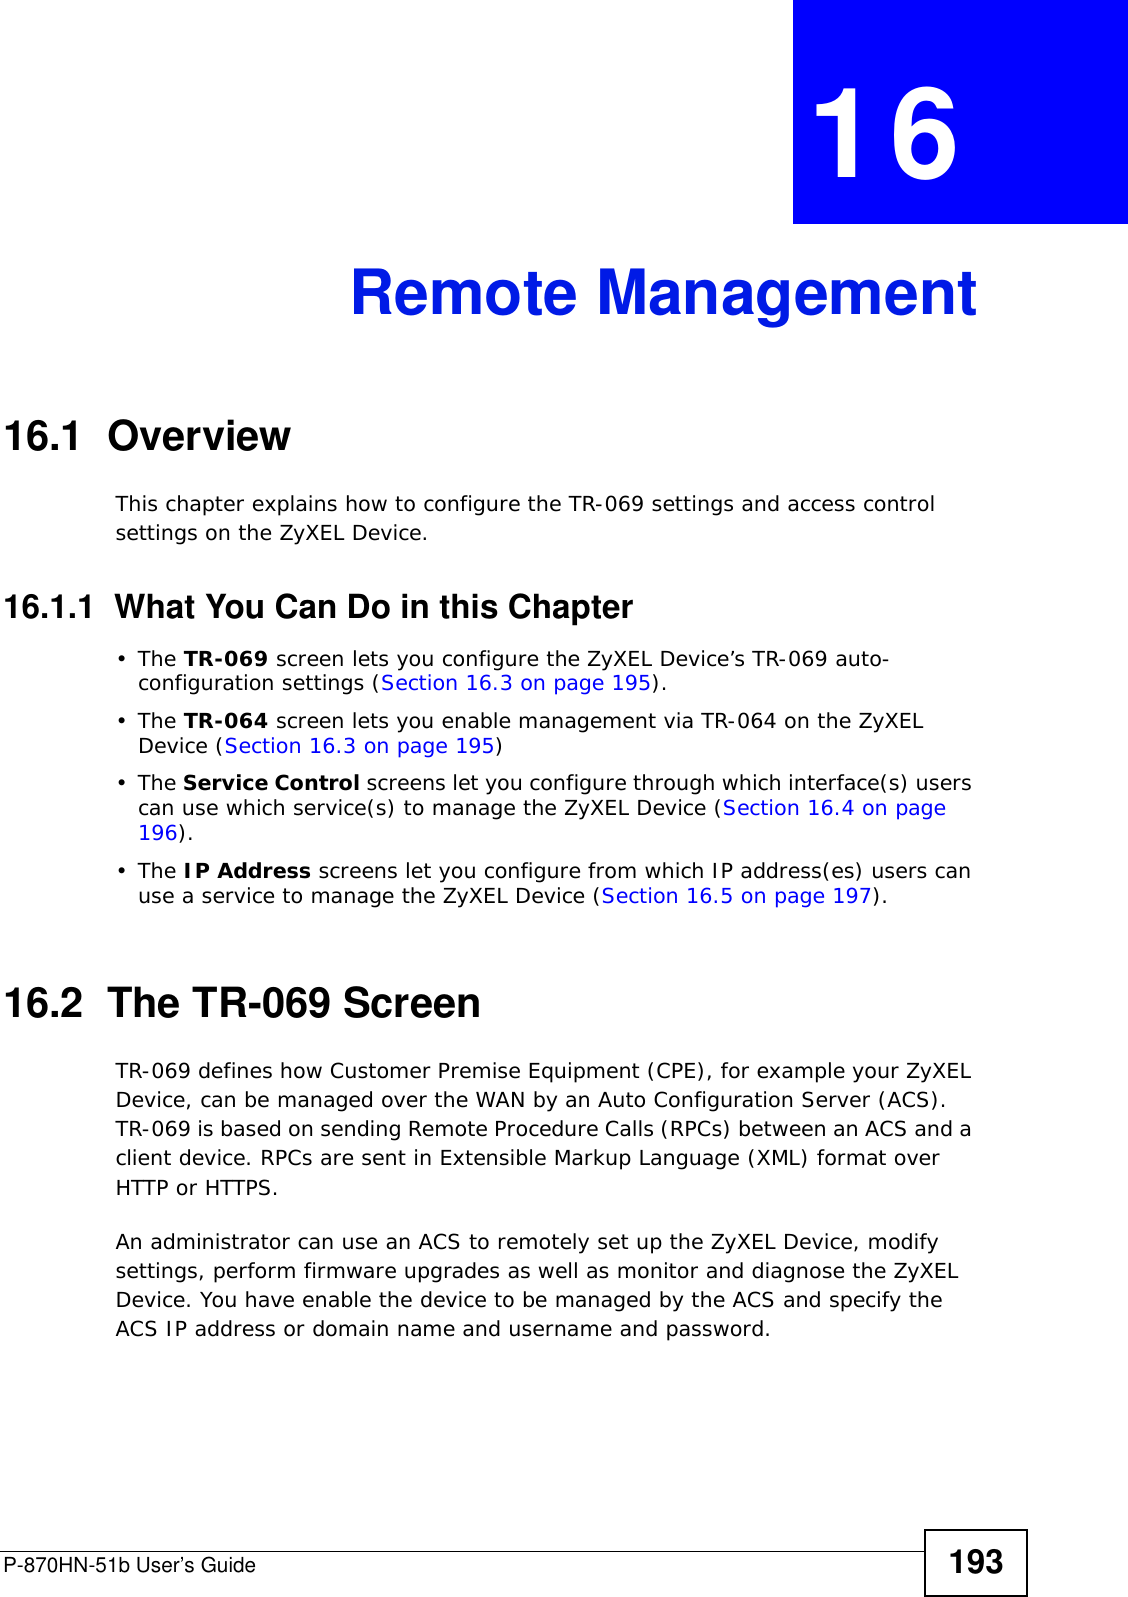 P-870HN-51b User’s Guide 193CHAPTER  16 Remote Management16.1  OverviewThis chapter explains how to configure the TR-069 settings and access control settings on the ZyXEL Device.16.1.1  What You Can Do in this Chapter•The TR-069 screen lets you configure the ZyXEL Device’s TR-069 auto-configuration settings (Section 16.3 on page 195).•The TR-064 screen lets you enable management via TR-064 on the ZyXEL Device (Section 16.3 on page 195)•The Service Control screens let you configure through which interface(s) users can use which service(s) to manage the ZyXEL Device (Section 16.4 on page 196).•The IP Address screens let you configure from which IP address(es) users can use a service to manage the ZyXEL Device (Section 16.5 on page 197).16.2  The TR-069 ScreenTR-069 defines how Customer Premise Equipment (CPE), for example your ZyXEL Device, can be managed over the WAN by an Auto Configuration Server (ACS). TR-069 is based on sending Remote Procedure Calls (RPCs) between an ACS and a client device. RPCs are sent in Extensible Markup Language (XML) format over HTTP or HTTPS. An administrator can use an ACS to remotely set up the ZyXEL Device, modify settings, perform firmware upgrades as well as monitor and diagnose the ZyXEL Device. You have enable the device to be managed by the ACS and specify the ACS IP address or domain name and username and password.